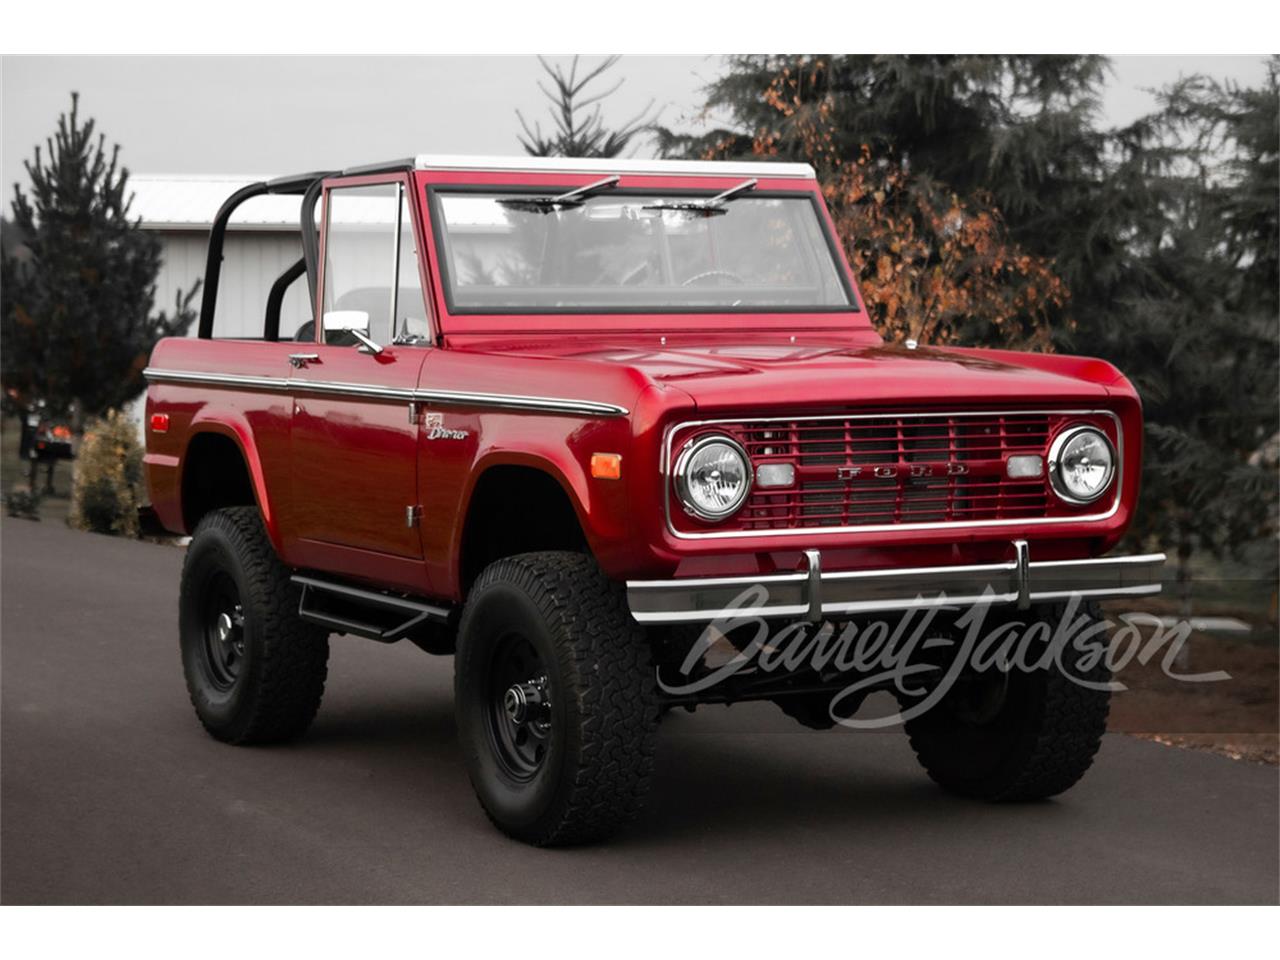 For Sale at Auction: 1974 Ford Bronco in Scottsdale, Arizona for sale in Scottsdale, AZ